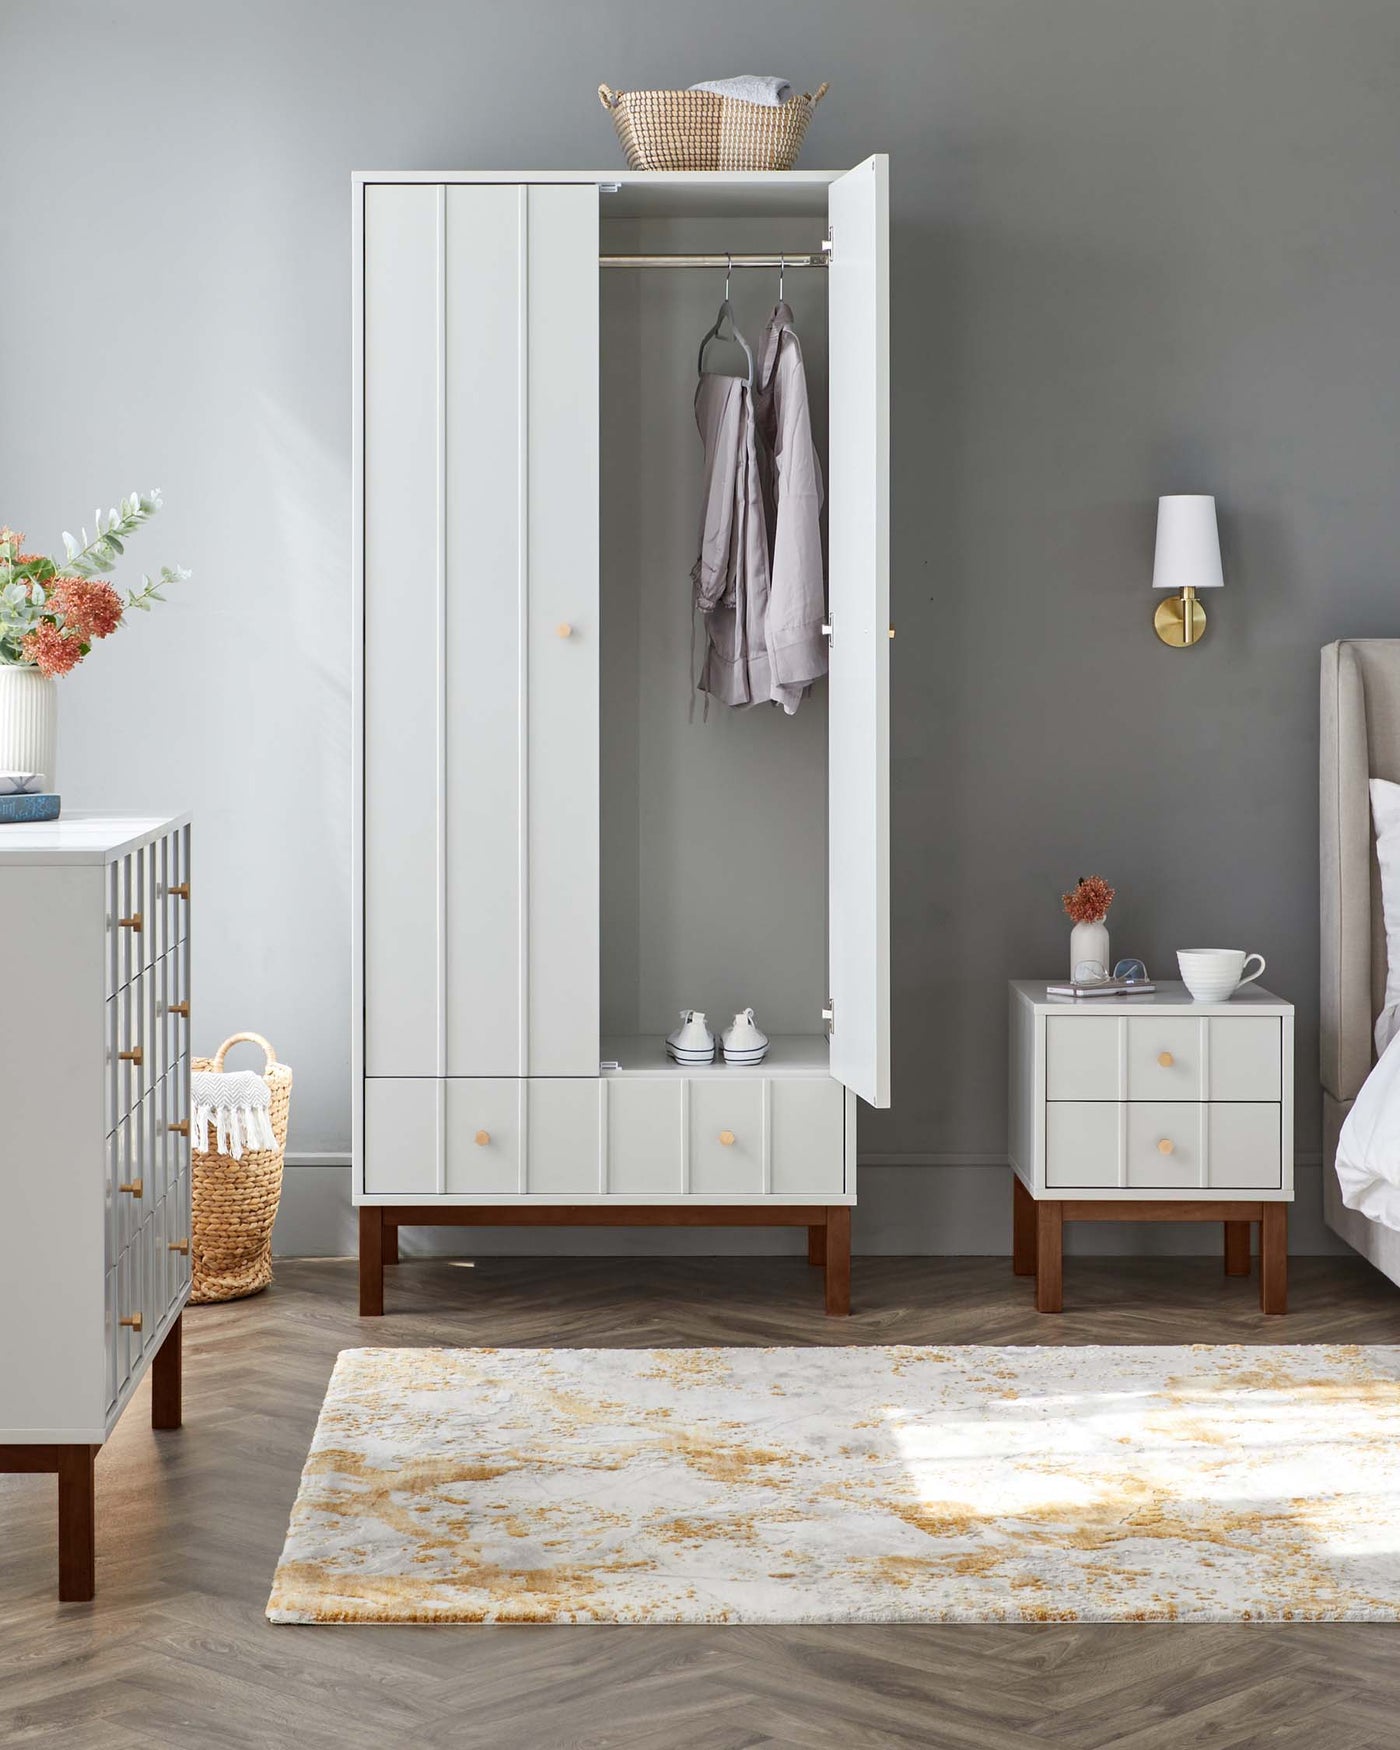 A modern light grey wardrobe with a full-length mirror, wooden base, and tapered legs, accompanied by a matching grey nightstand with two drawers and brass knobs on wooden legs. A sleek wall-mounted lamp is featured beside the wardrobe. The scene includes a cream and gold area rug on the floor.